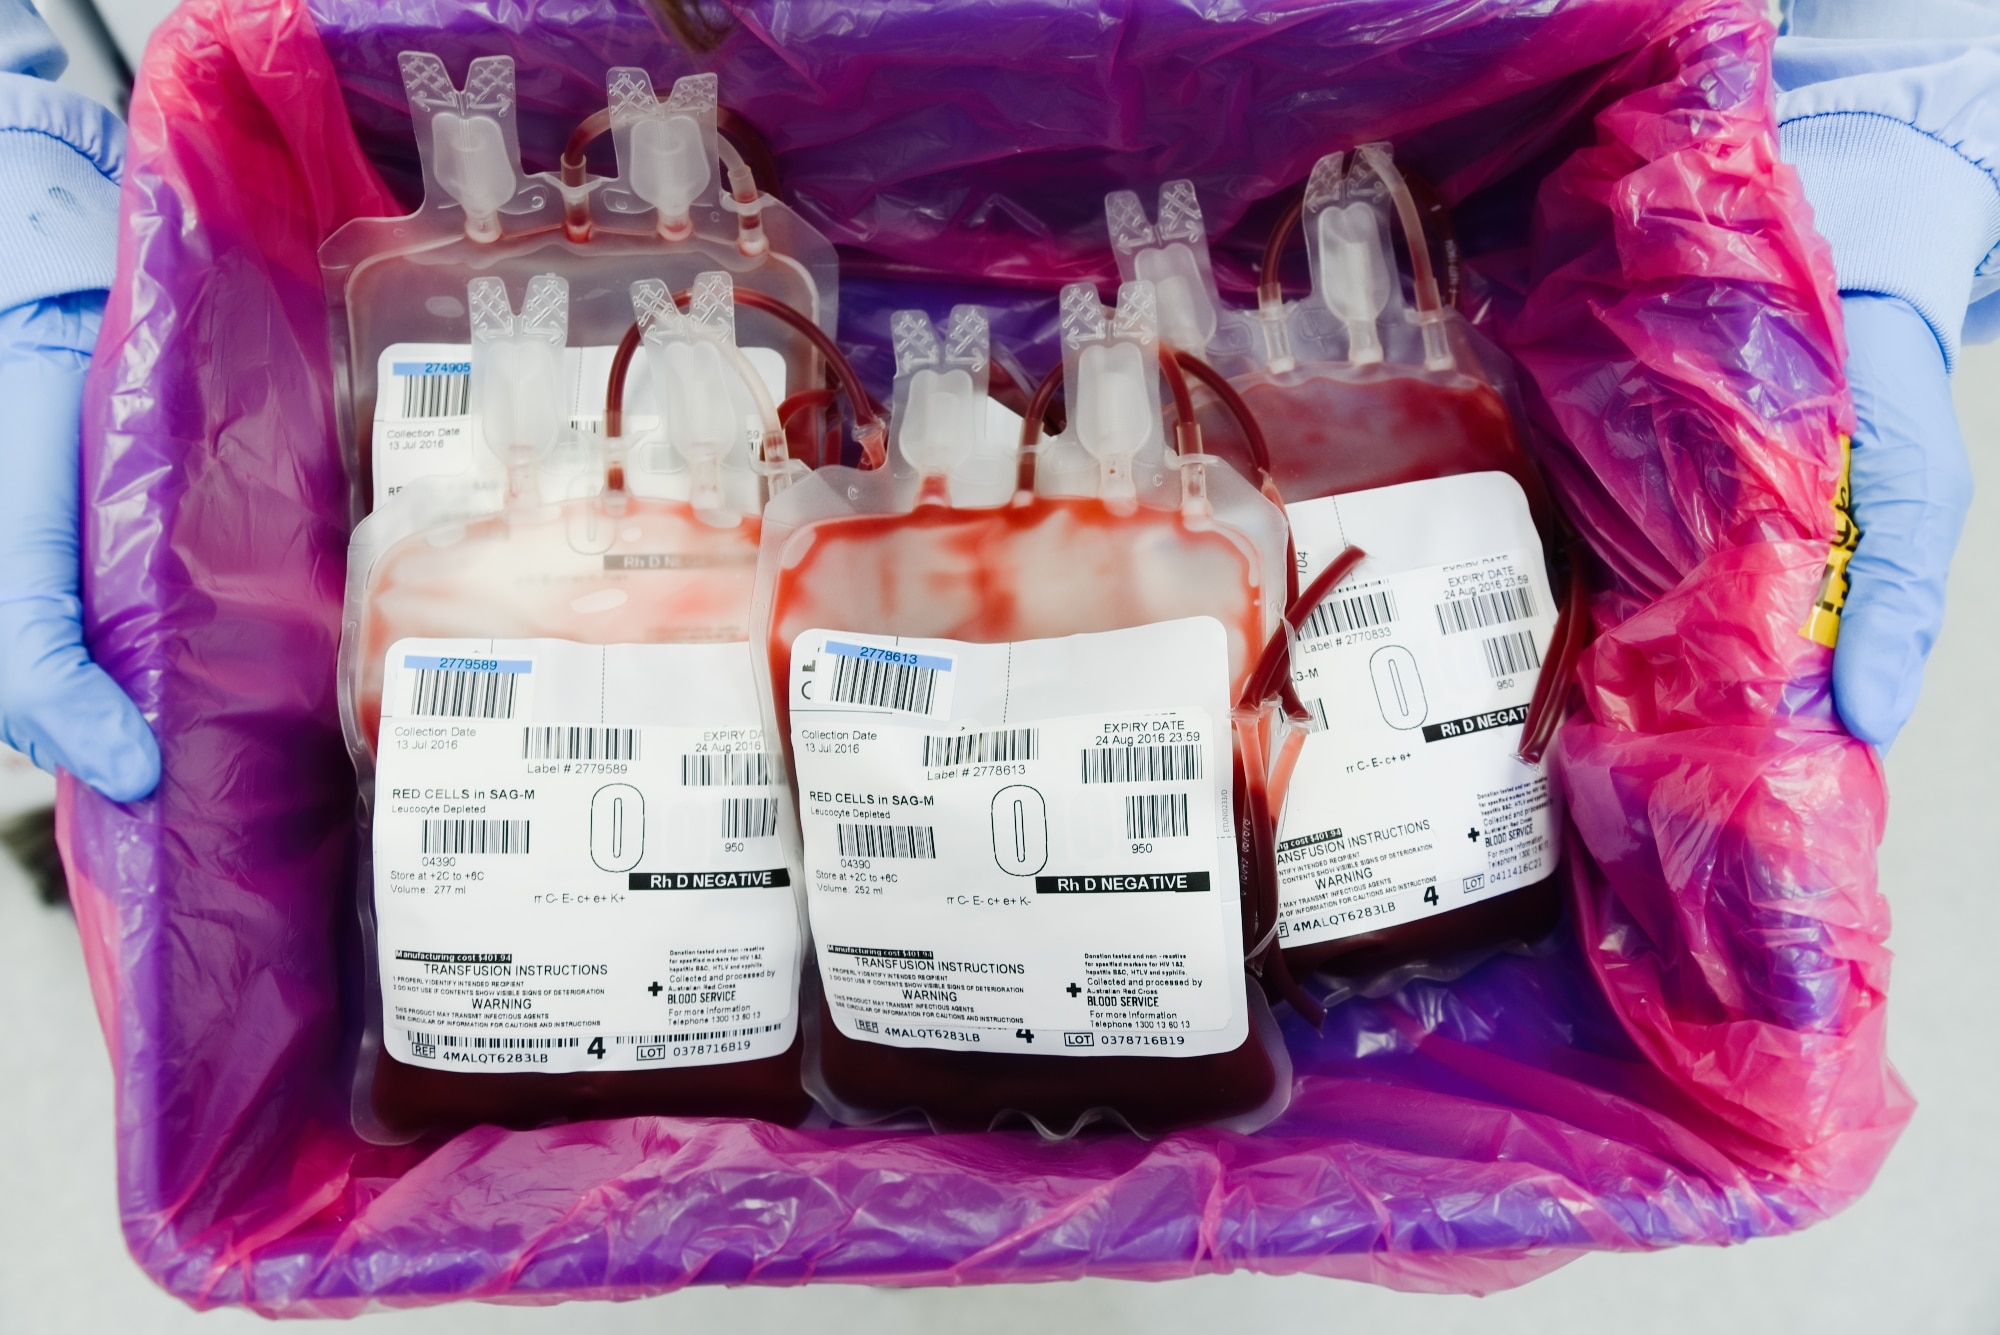 Australia needs more than 3,200 blood donors in less than a week.